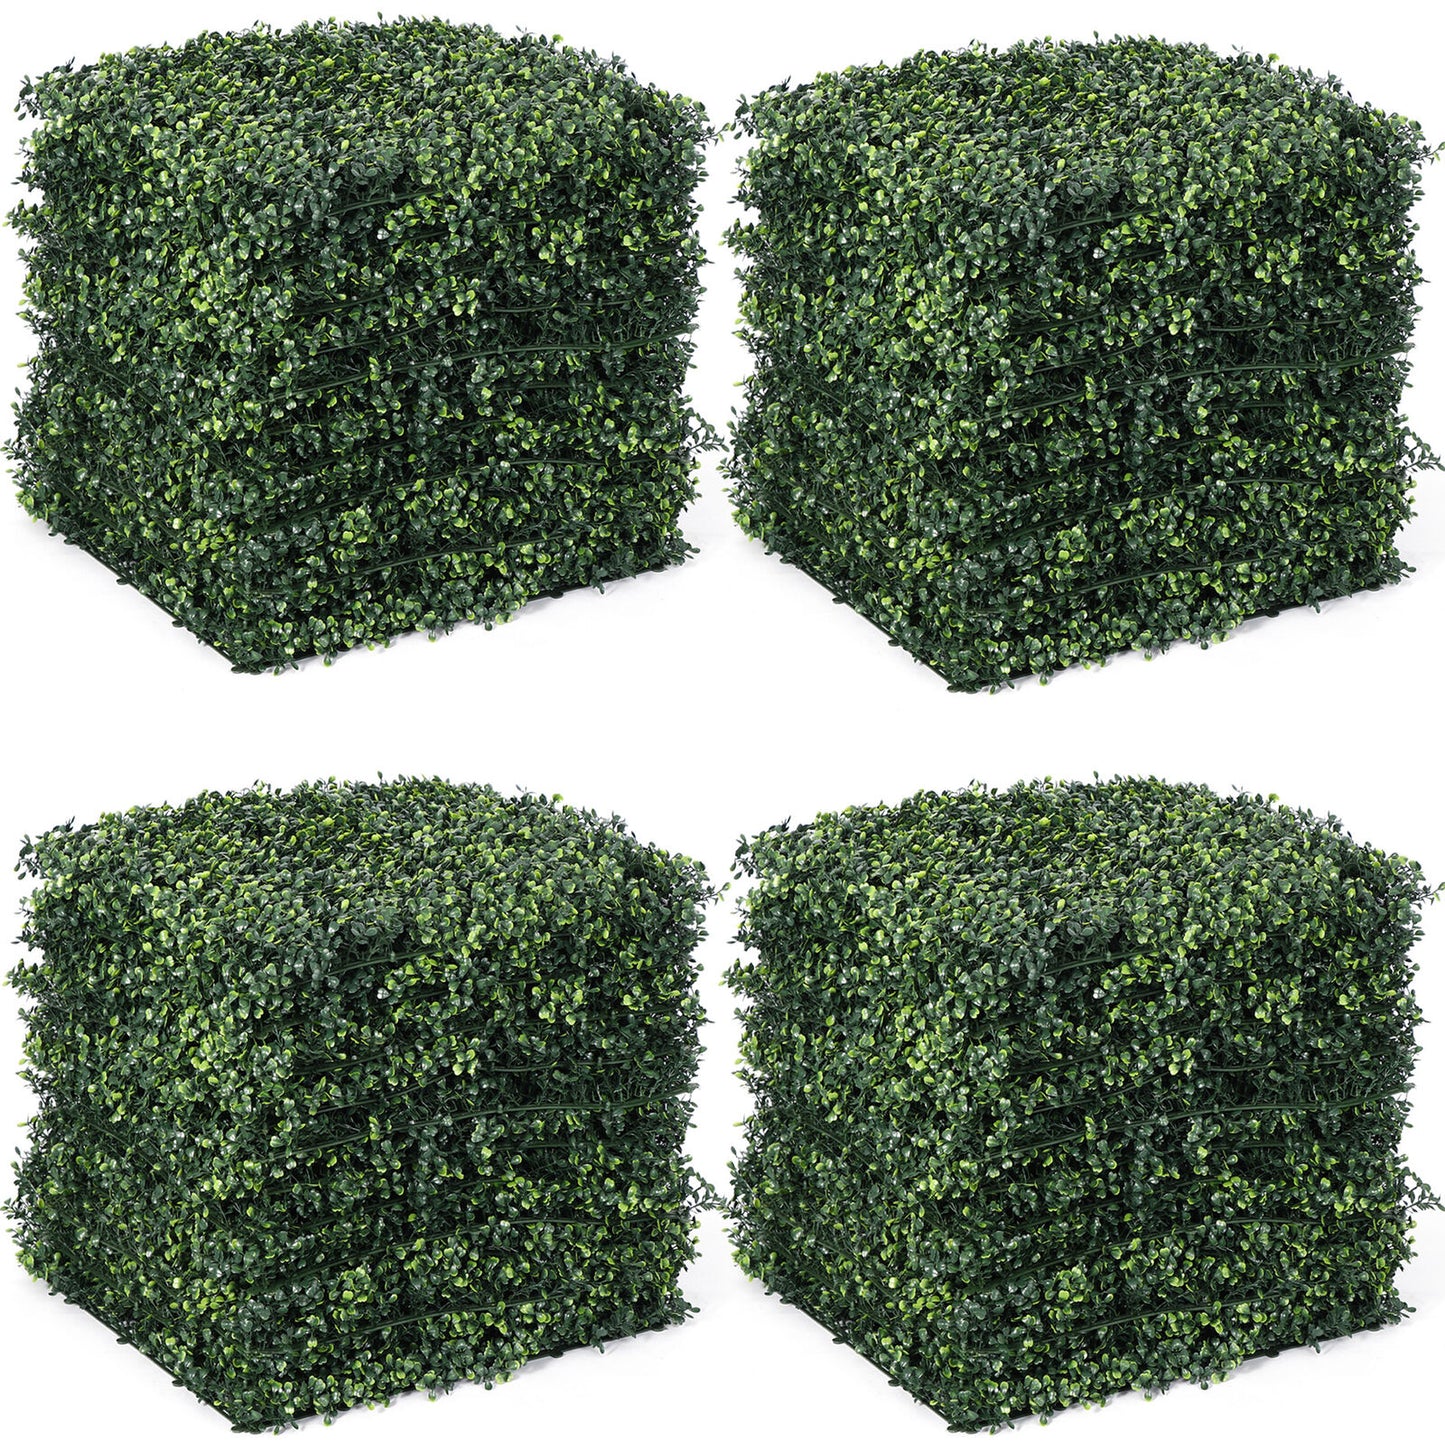 12pcs Artificial Boxwood Mat Wall Hedge Decor Privacy Fence Panels Grass 20x20"